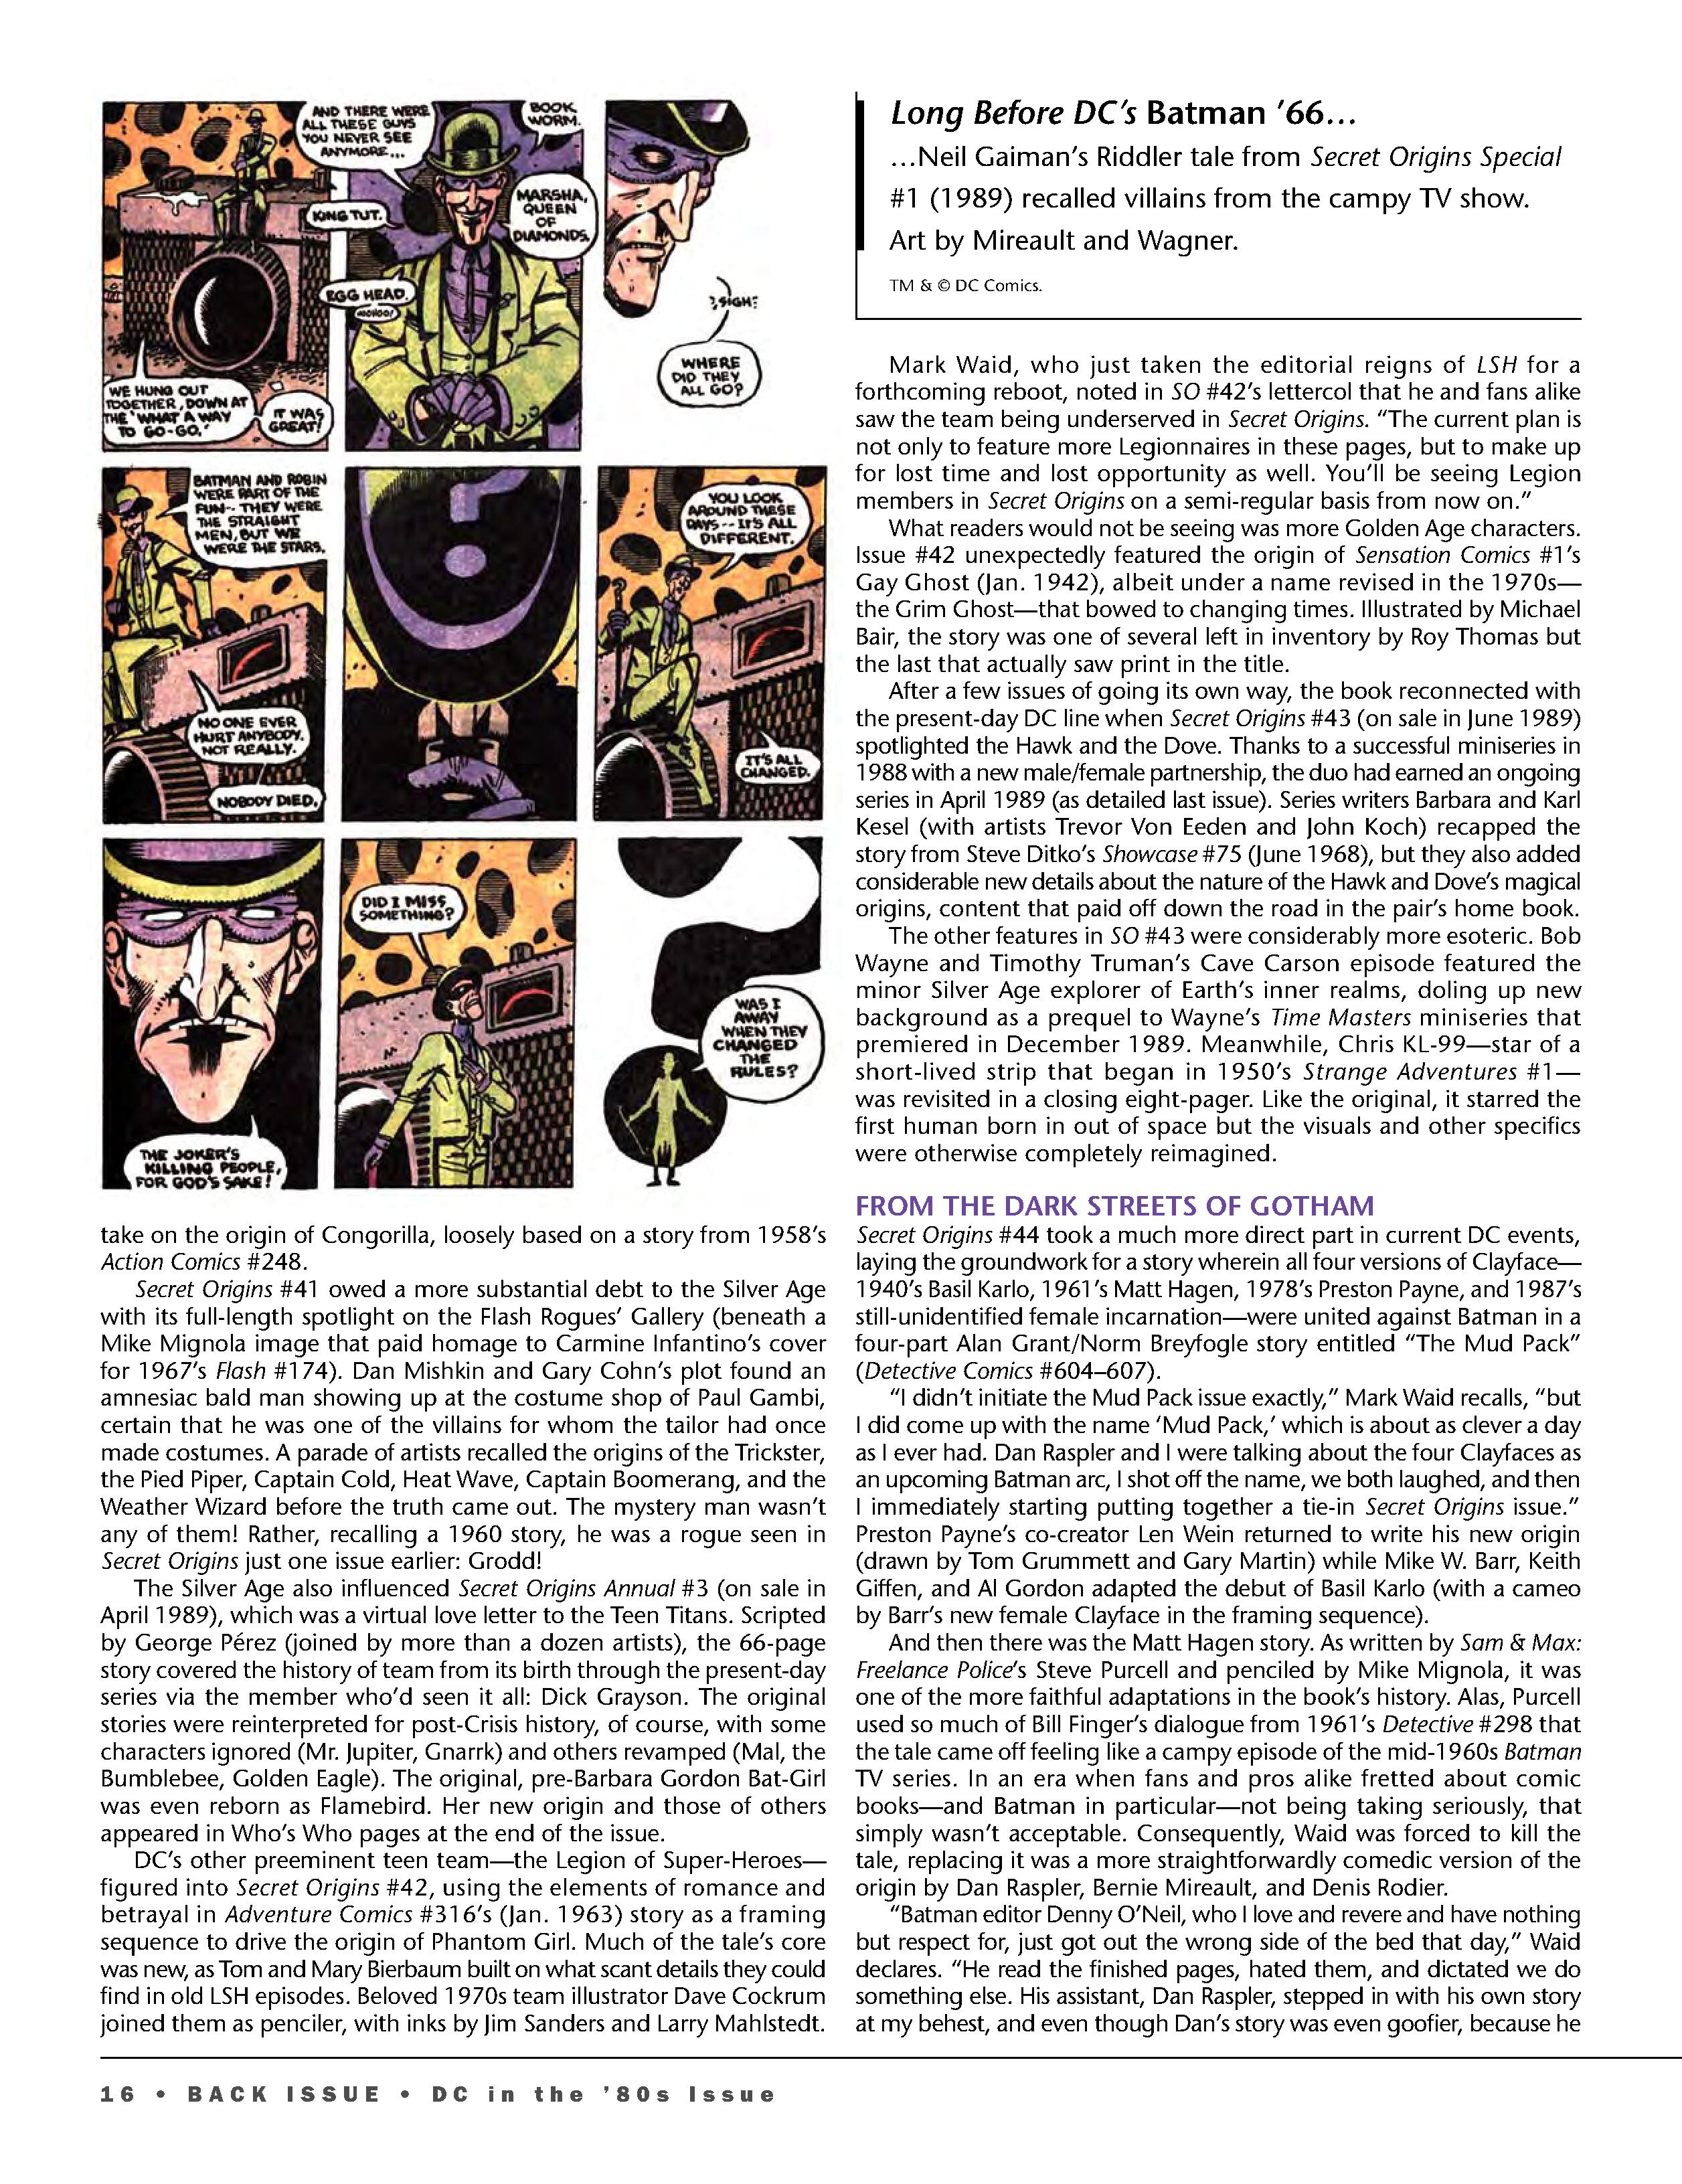 Read online Back Issue comic -  Issue #98 - 18